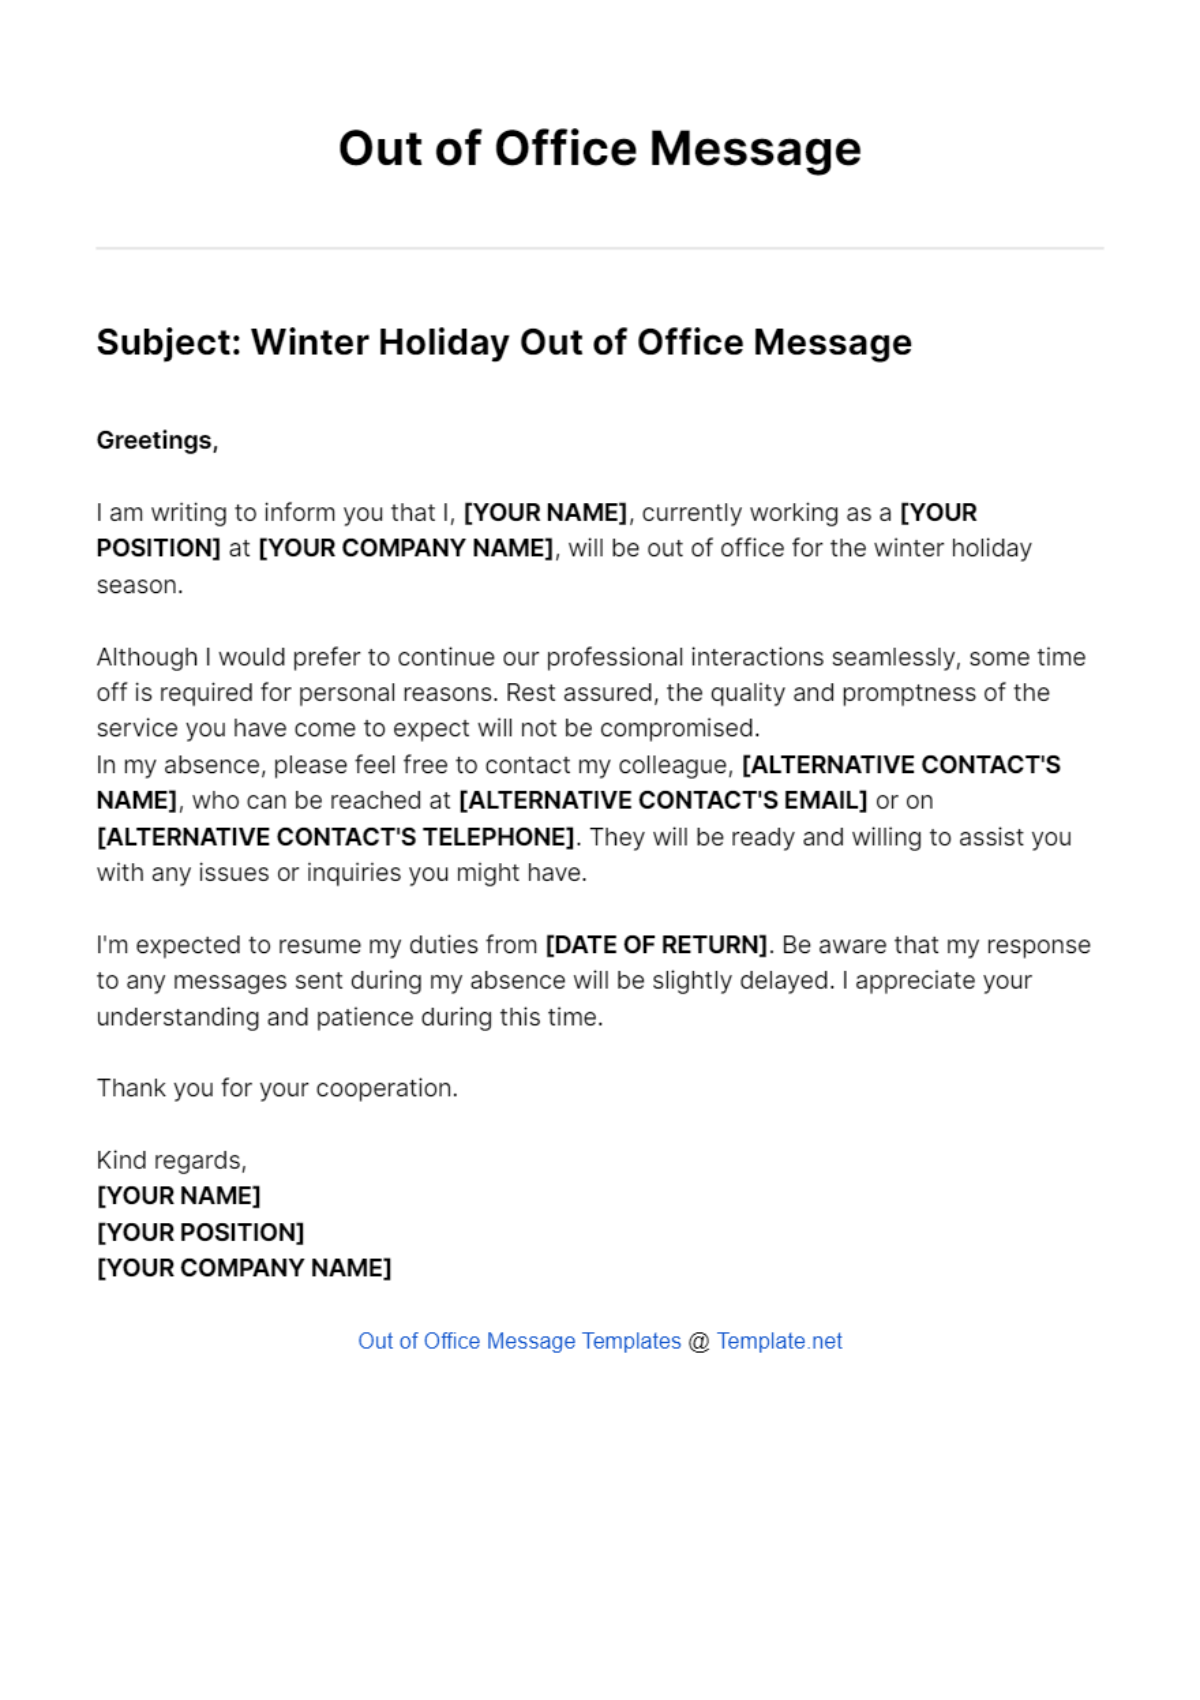 Free Out Of Office Message Winter Holiday Template